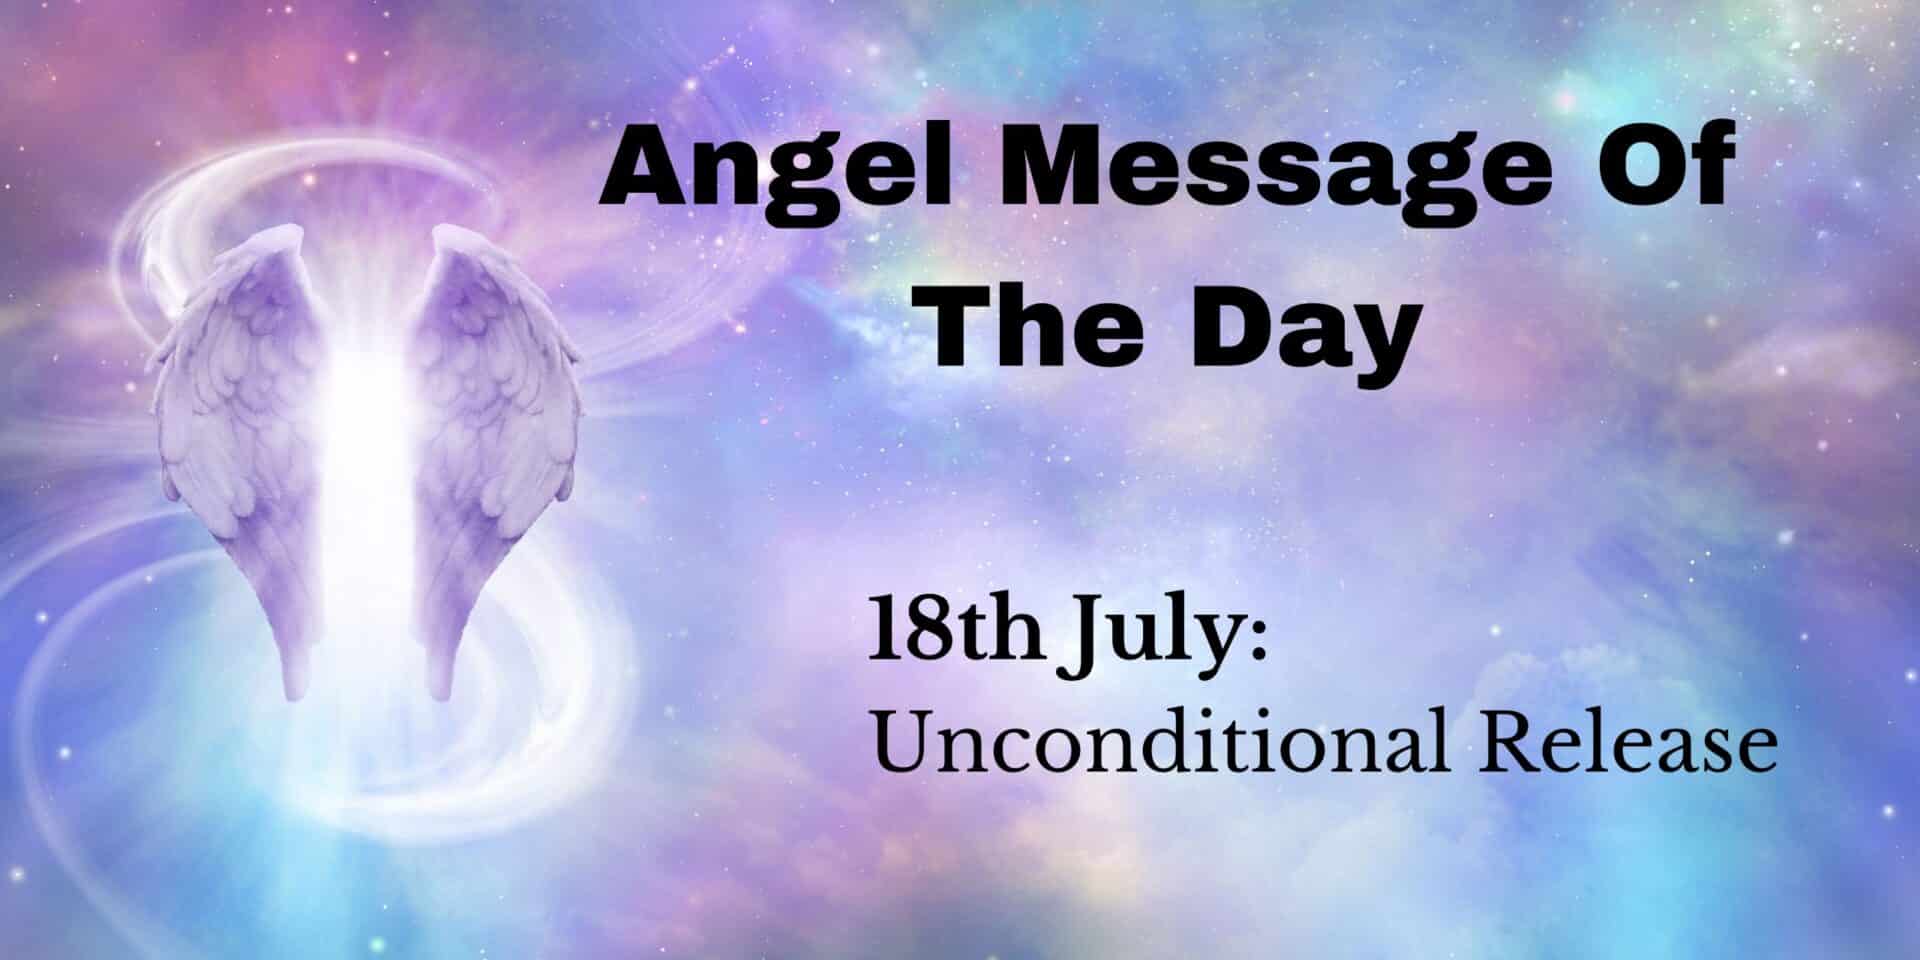 angel message of the day : unconditional release